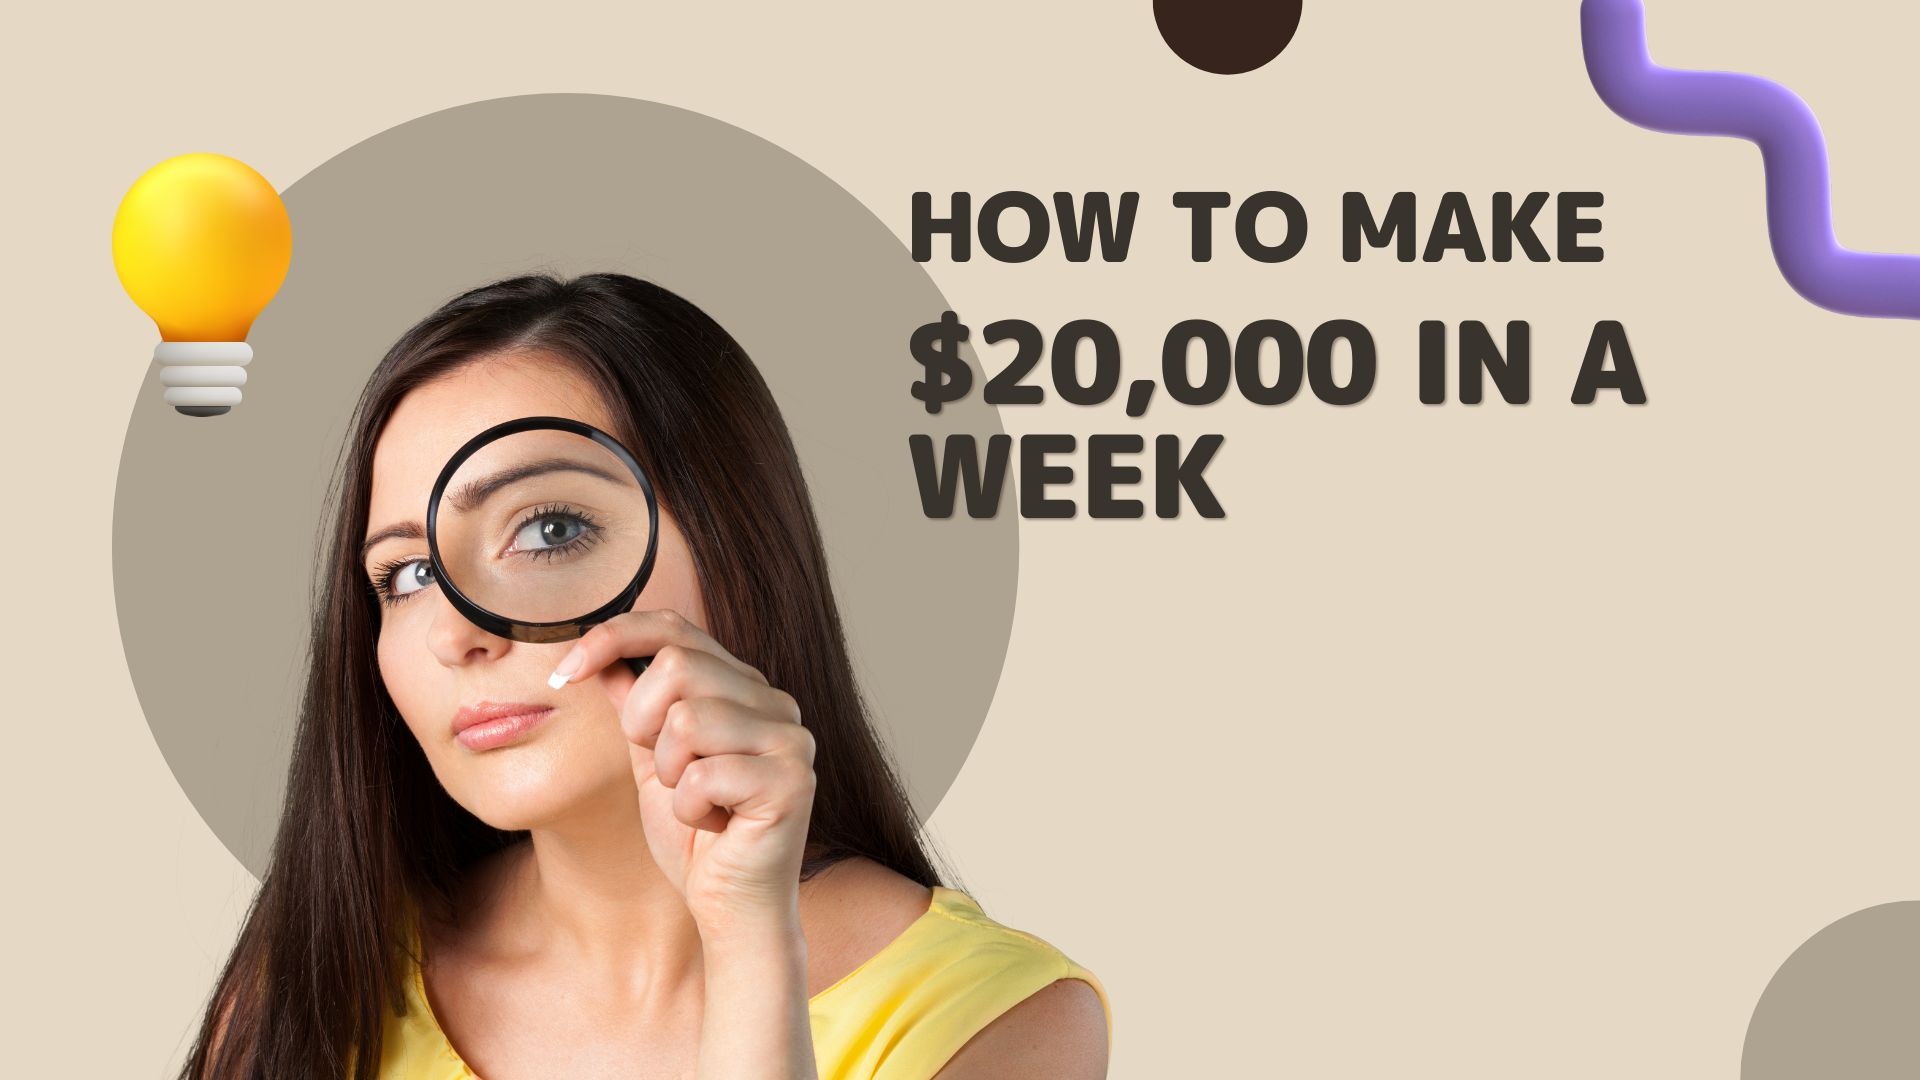 How to Make $20,000 in a Week